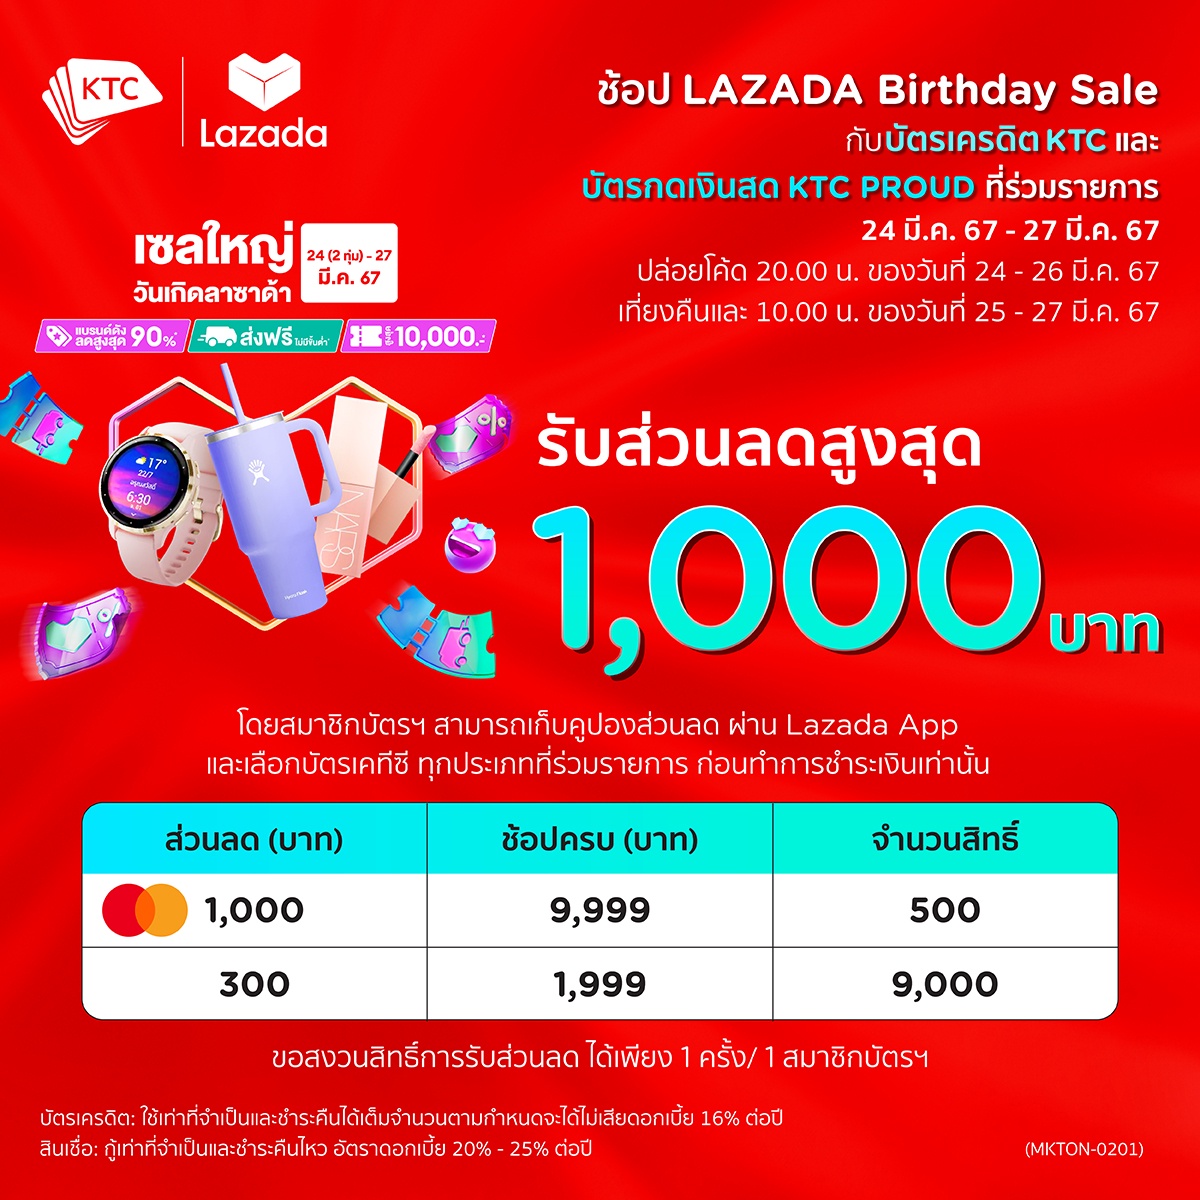 KTC Celebrates Lazada's 12th Anniversary in Thailand: Up to 1,000 Baht Discount for Credit Card and 'KTC PROUD' Cardmembers